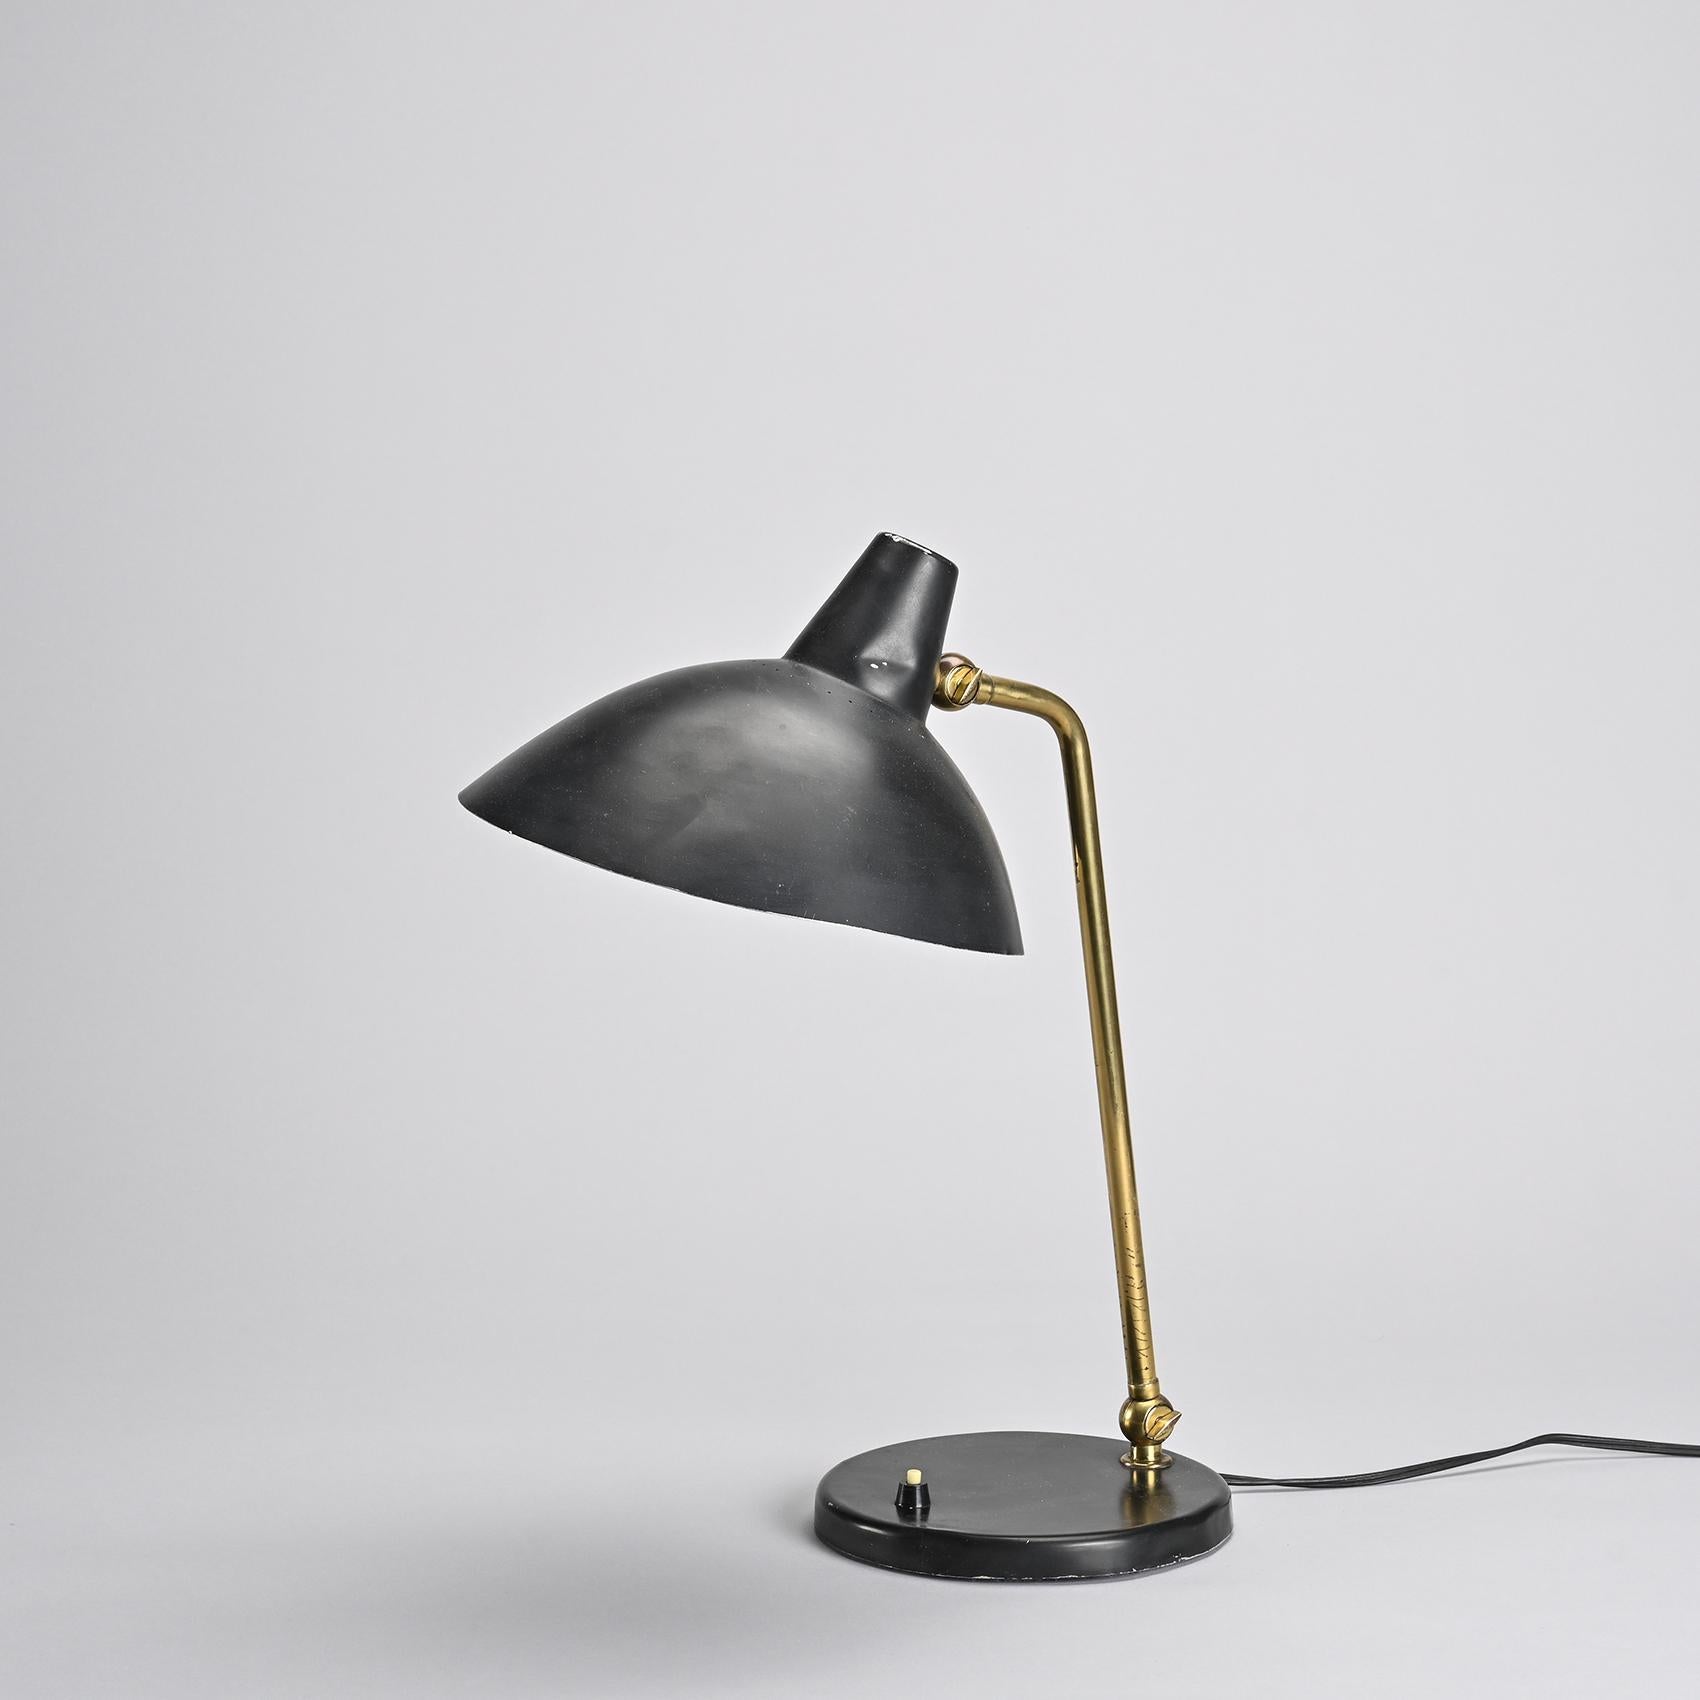 Mid-Century Modern 1950s Table Lamp by Alfred Muller For Amba